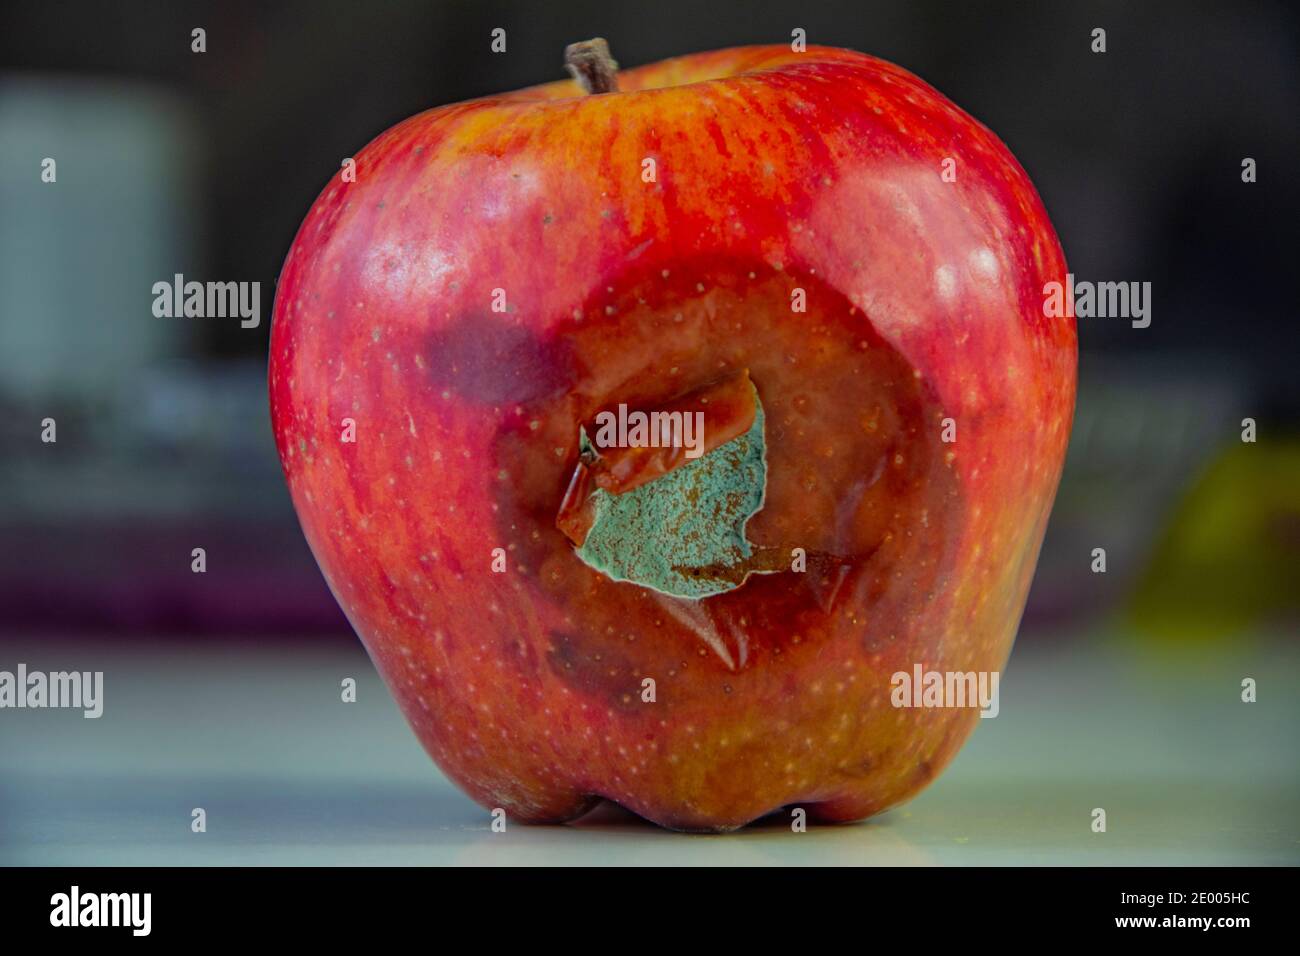 Premium PSD  One rustic old apple rotten apple closeup isolated on a  transparent background